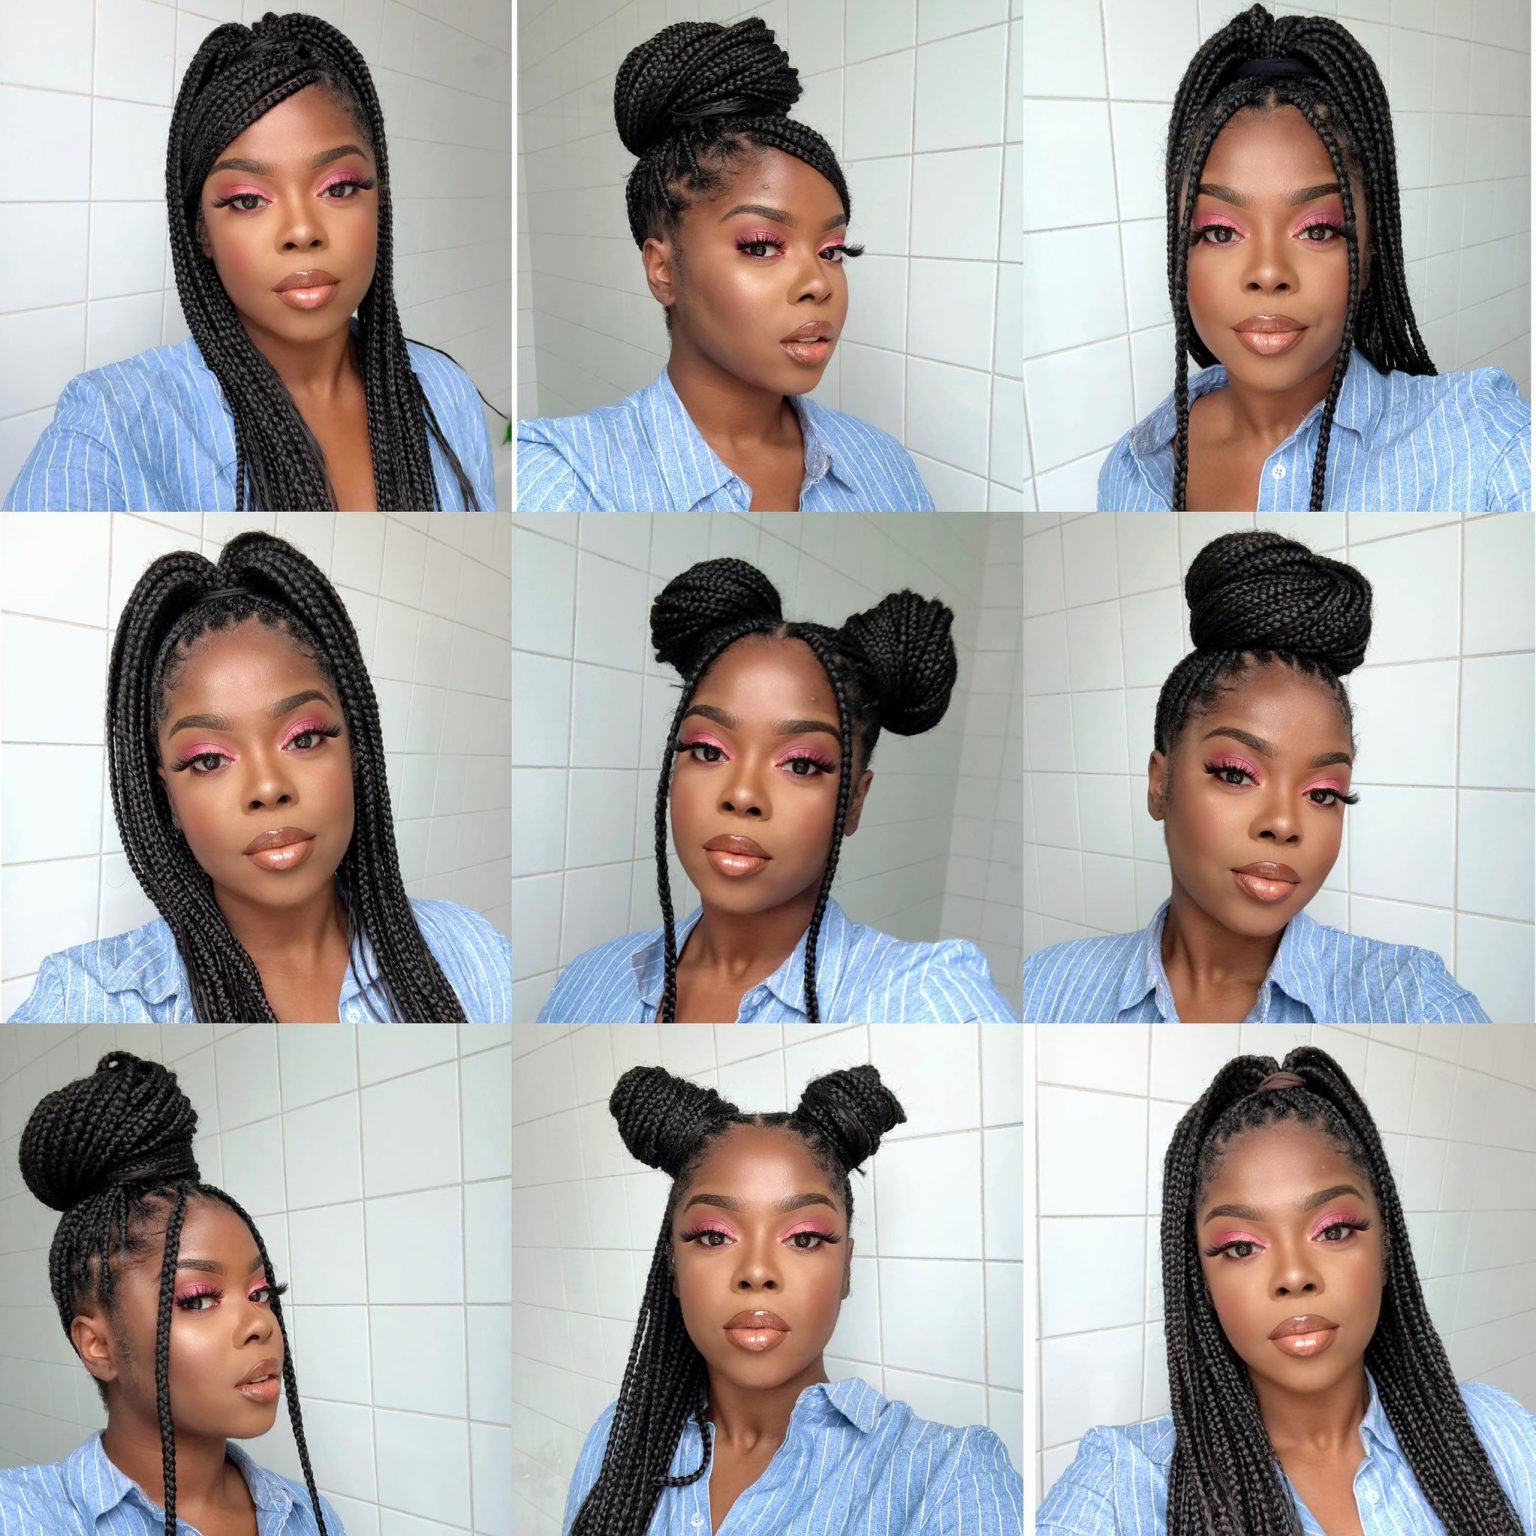 Braided hairstyles for African hair you could try - these are very easy ...